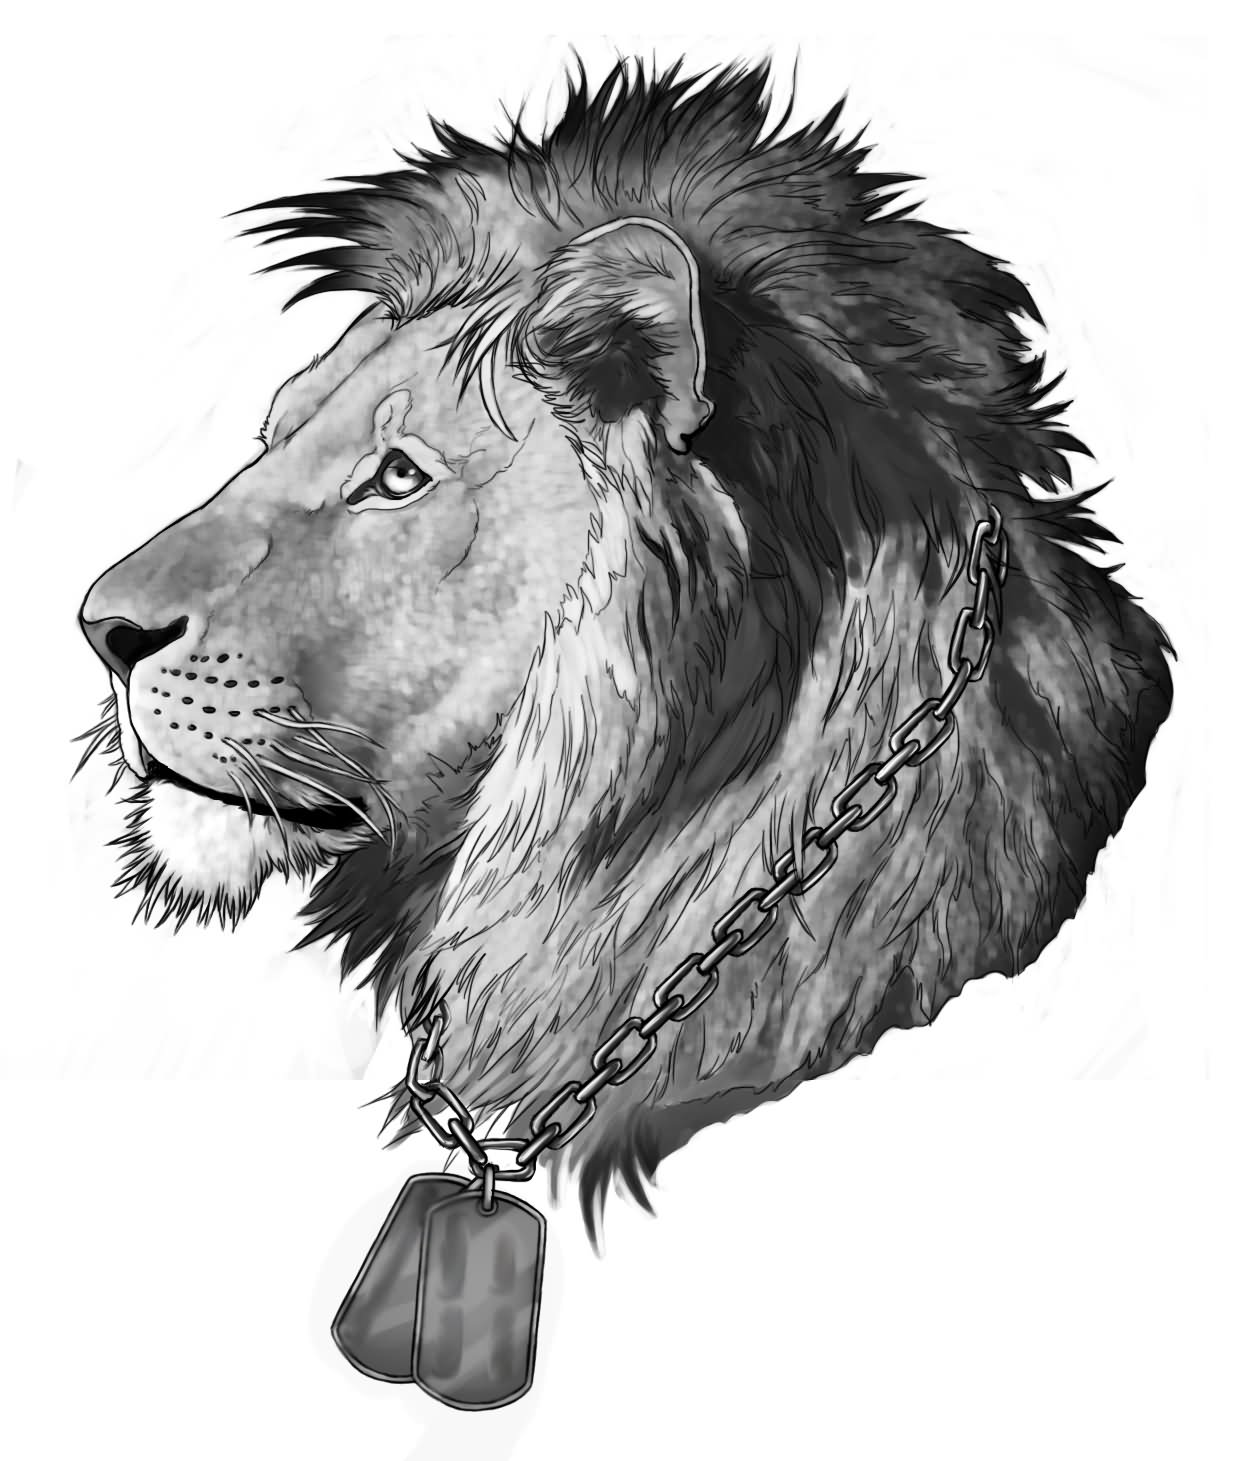 Realistic Lion Head with Chain tattoo design by RogueLiger